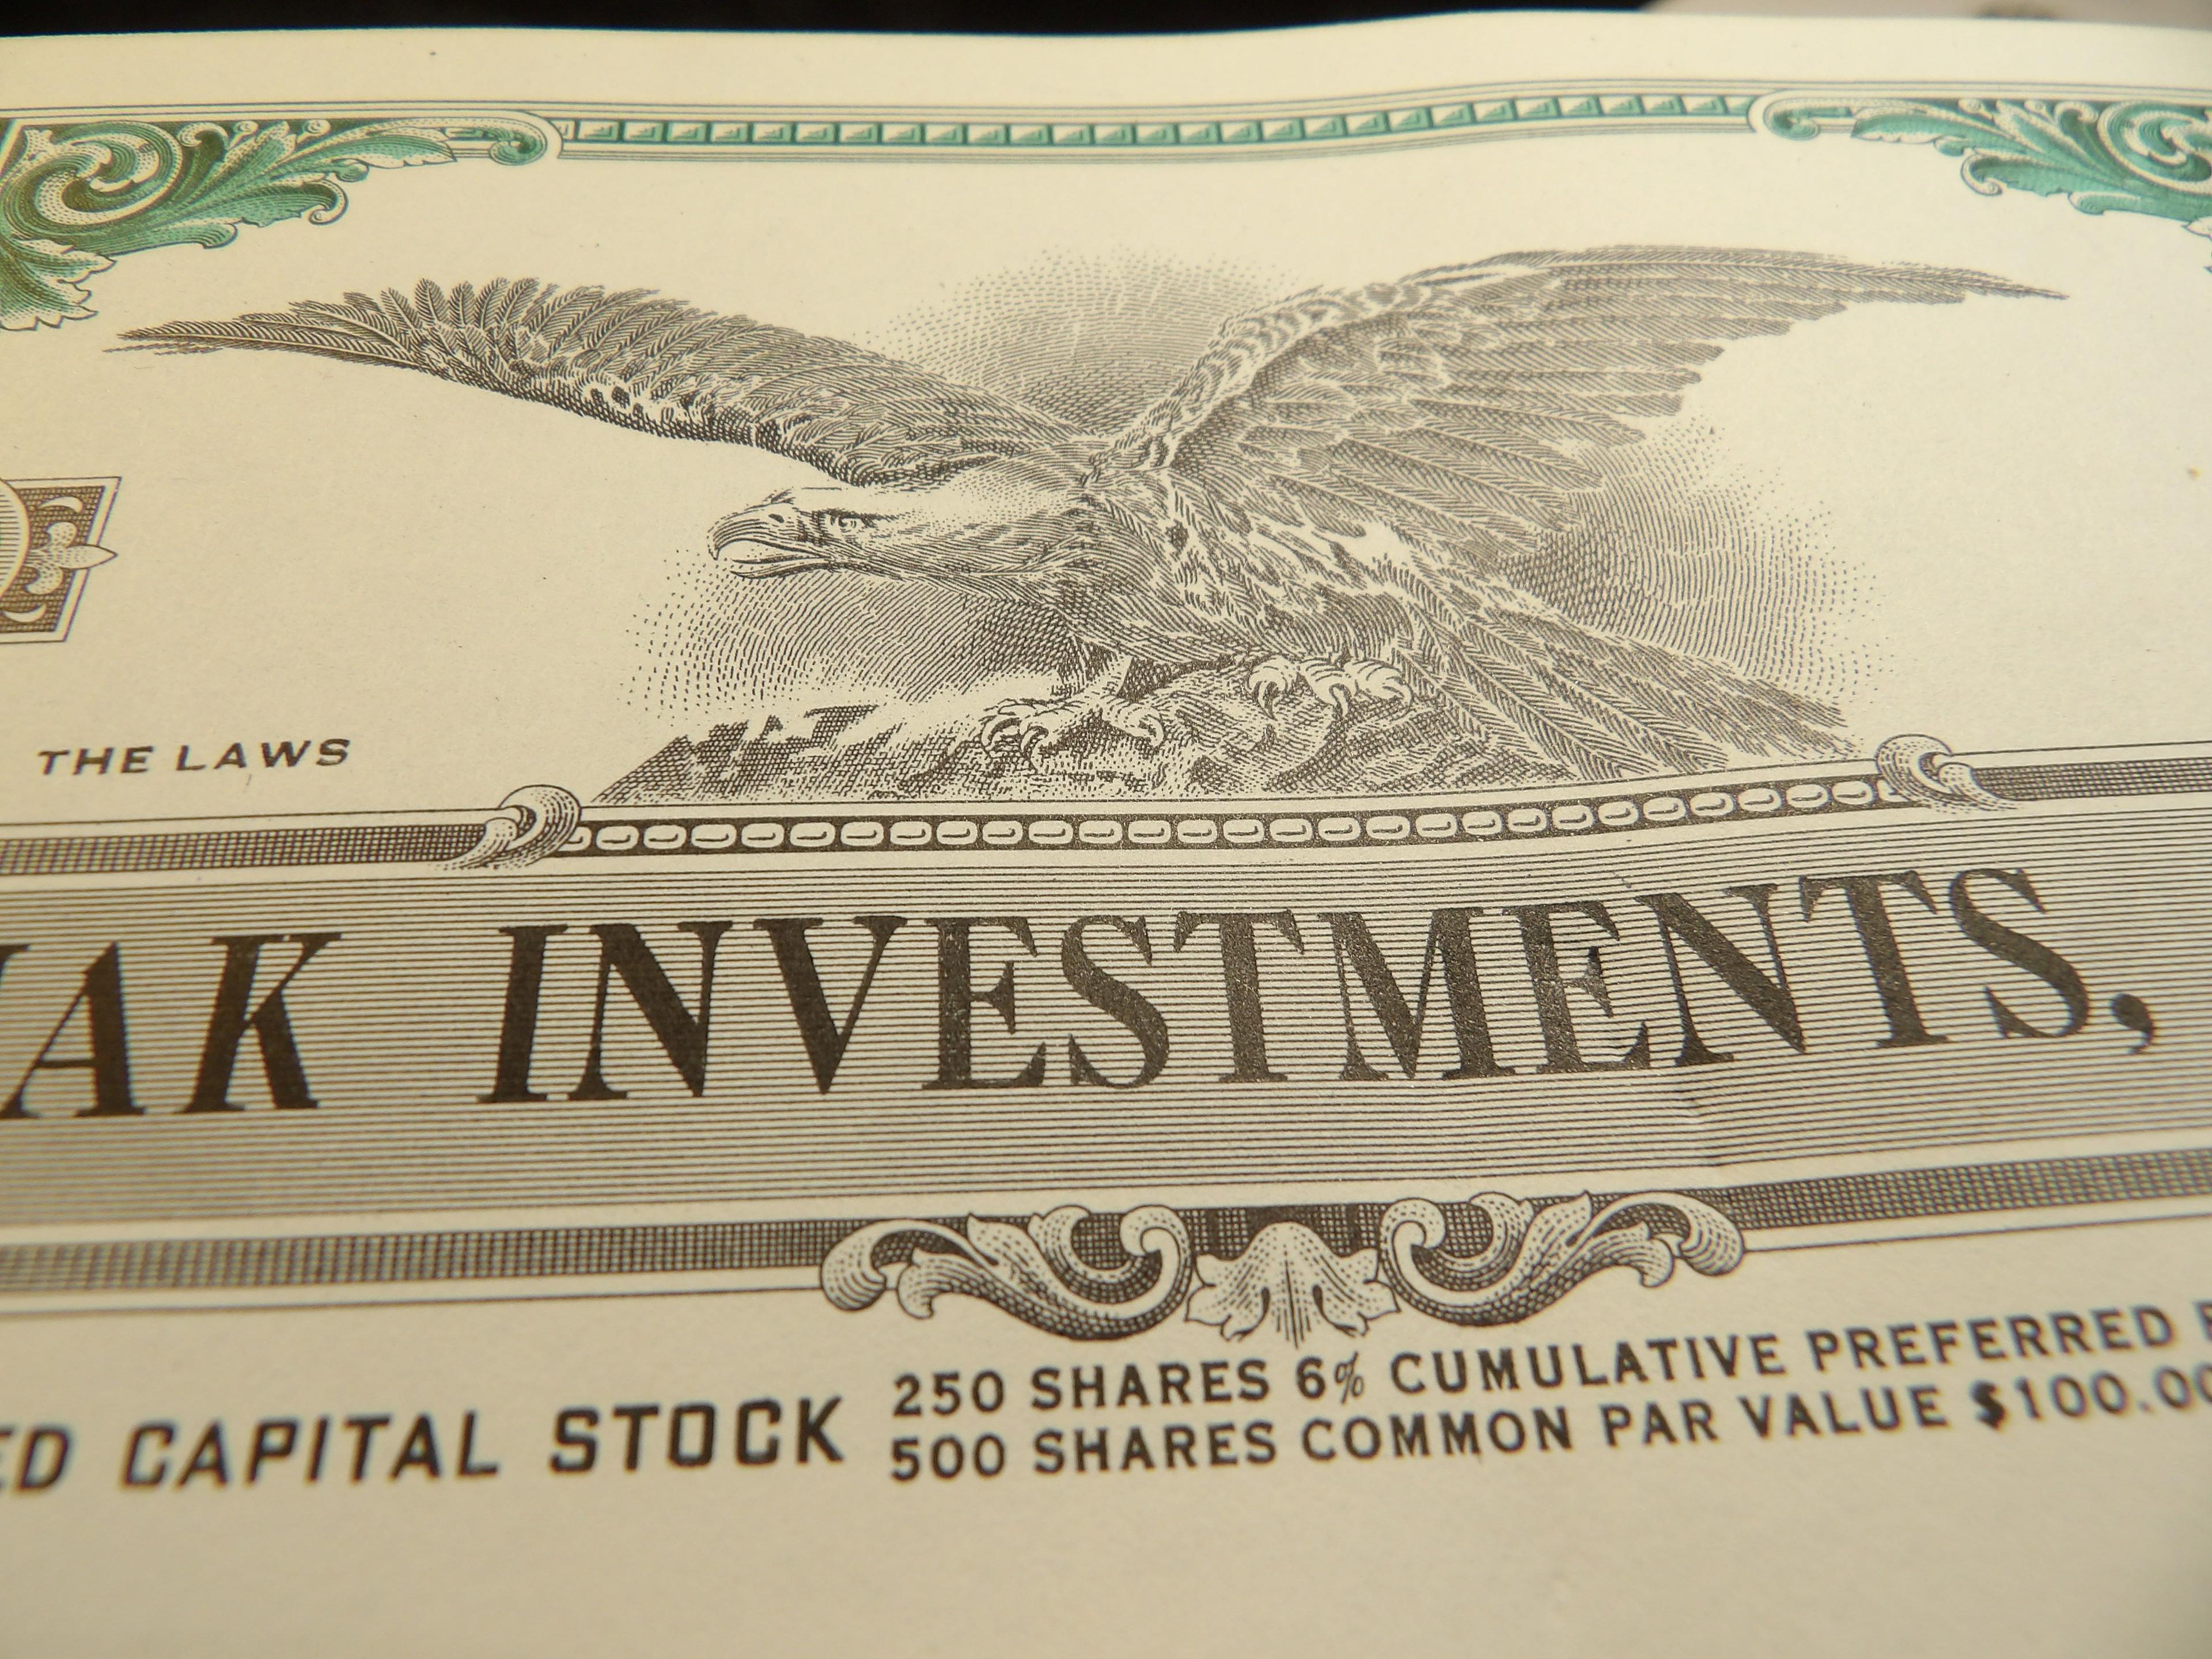 MAK INVESTMENTS, INC. Stock Certificate No. 31 unissued. Upper center Bald Eagle with spread wings.